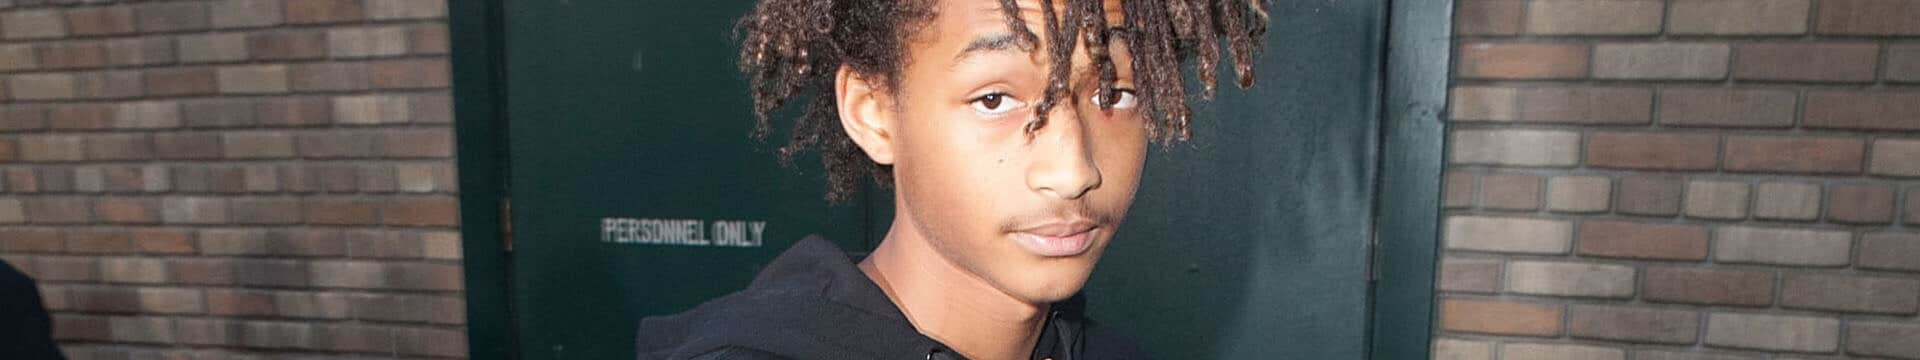 5 Lessons Every Entrepreneur Can Learn From Philosophical Genius Jaden Smith